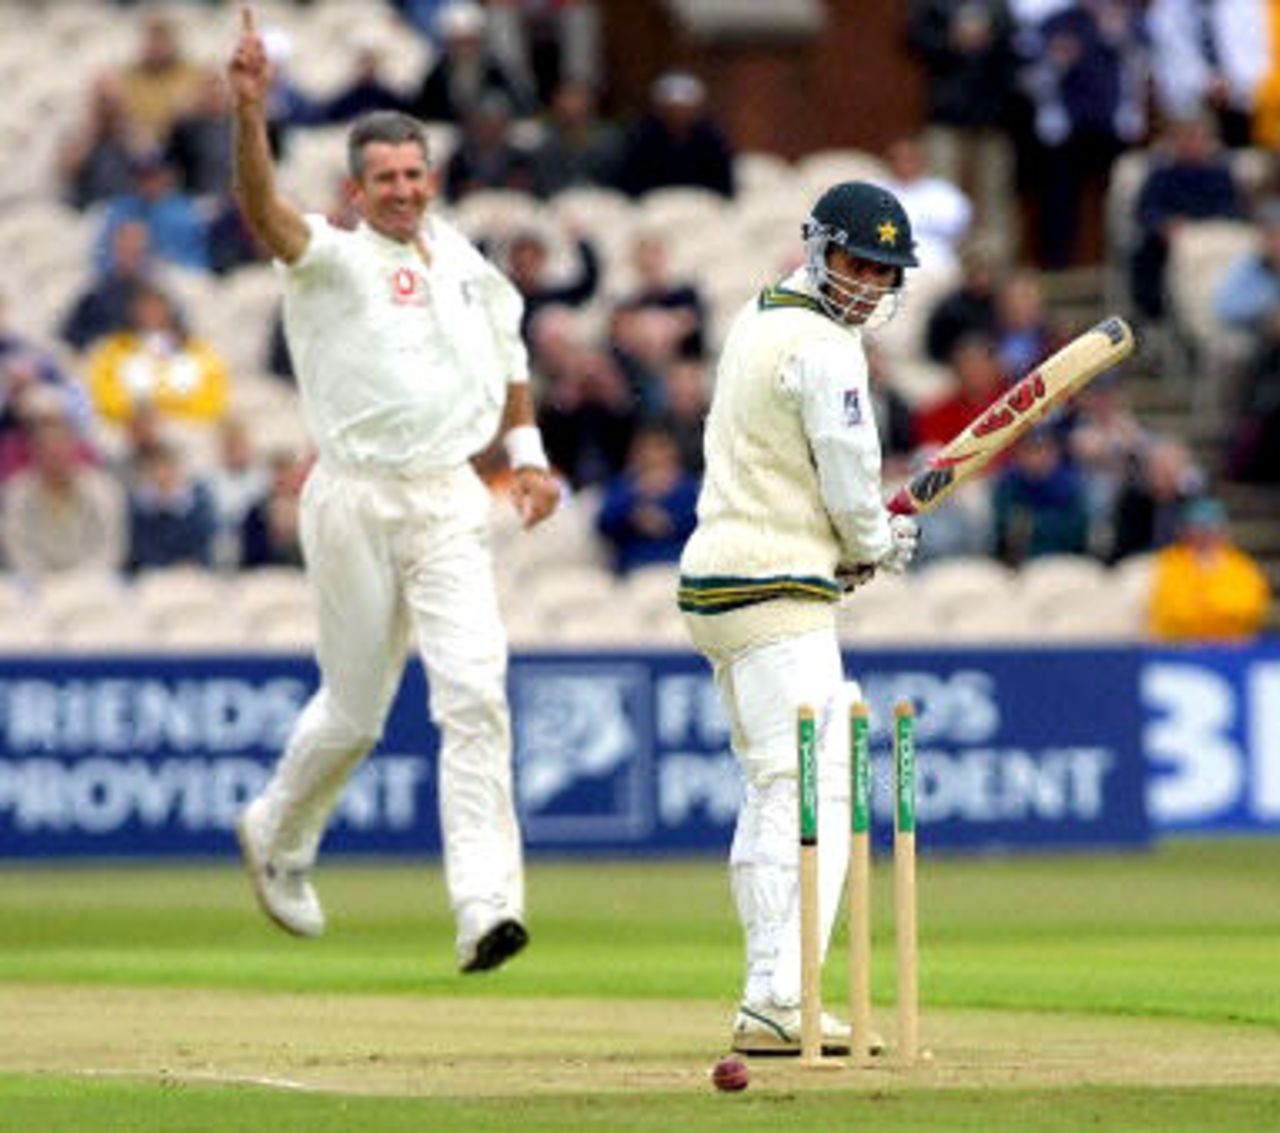 Andrew Caddick celebrates the dismissal of Abdul Razzaq, day 1, 2nd Test at Old Trafford, 31 May - 4 June 2001.